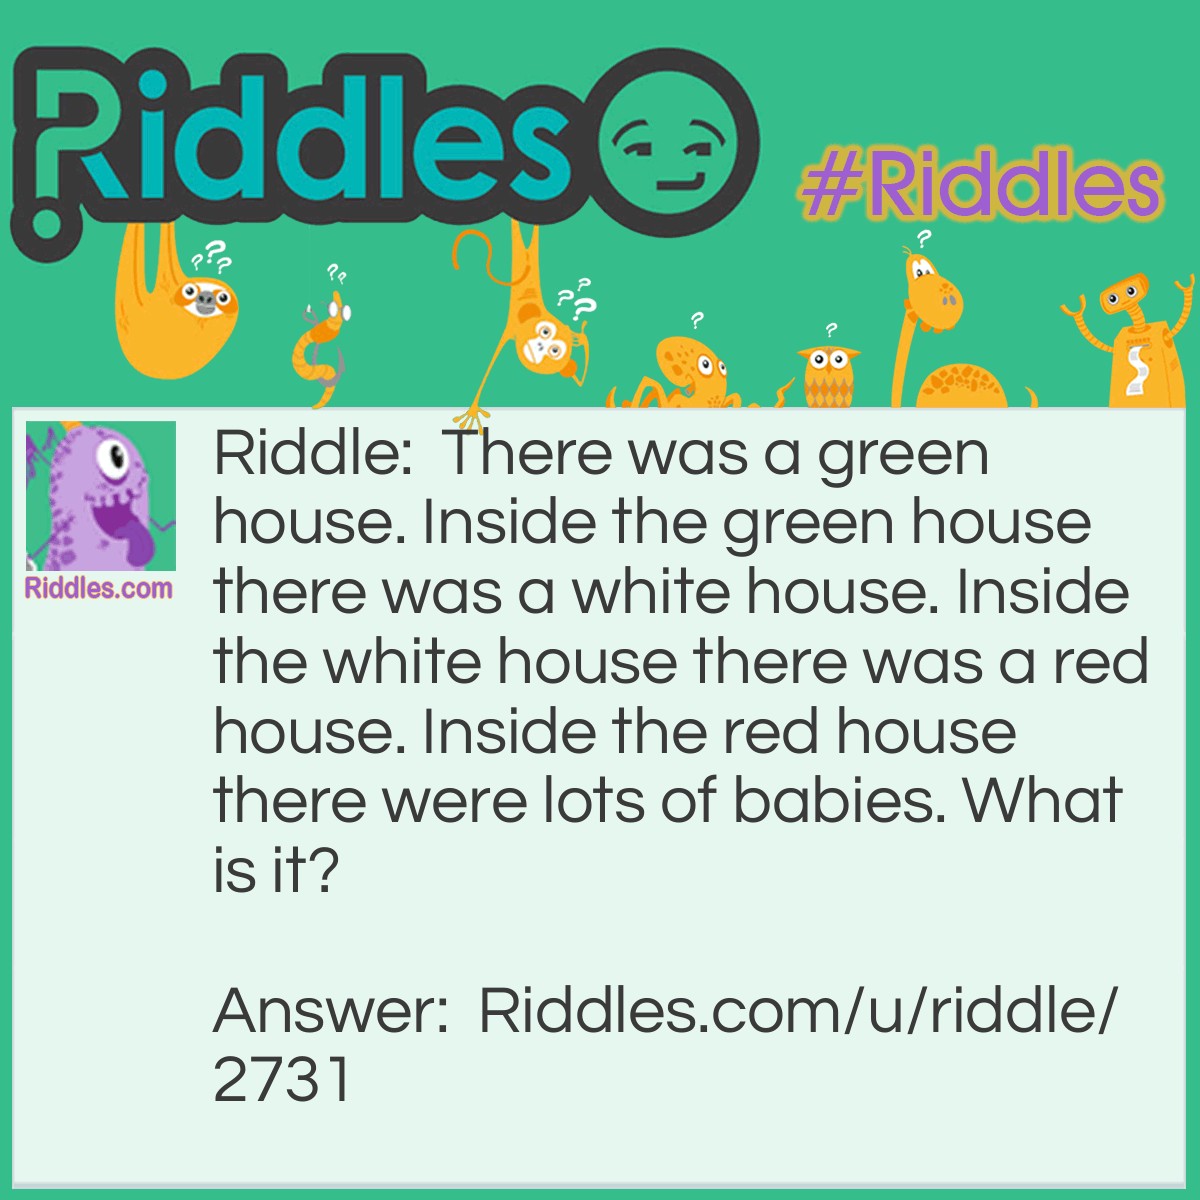 Riddle: There was a green house. Inside the green house there was a white house. Inside the white house there was a red house. Inside the red house there were lots of babies. What is it? Answer: Watermelon.